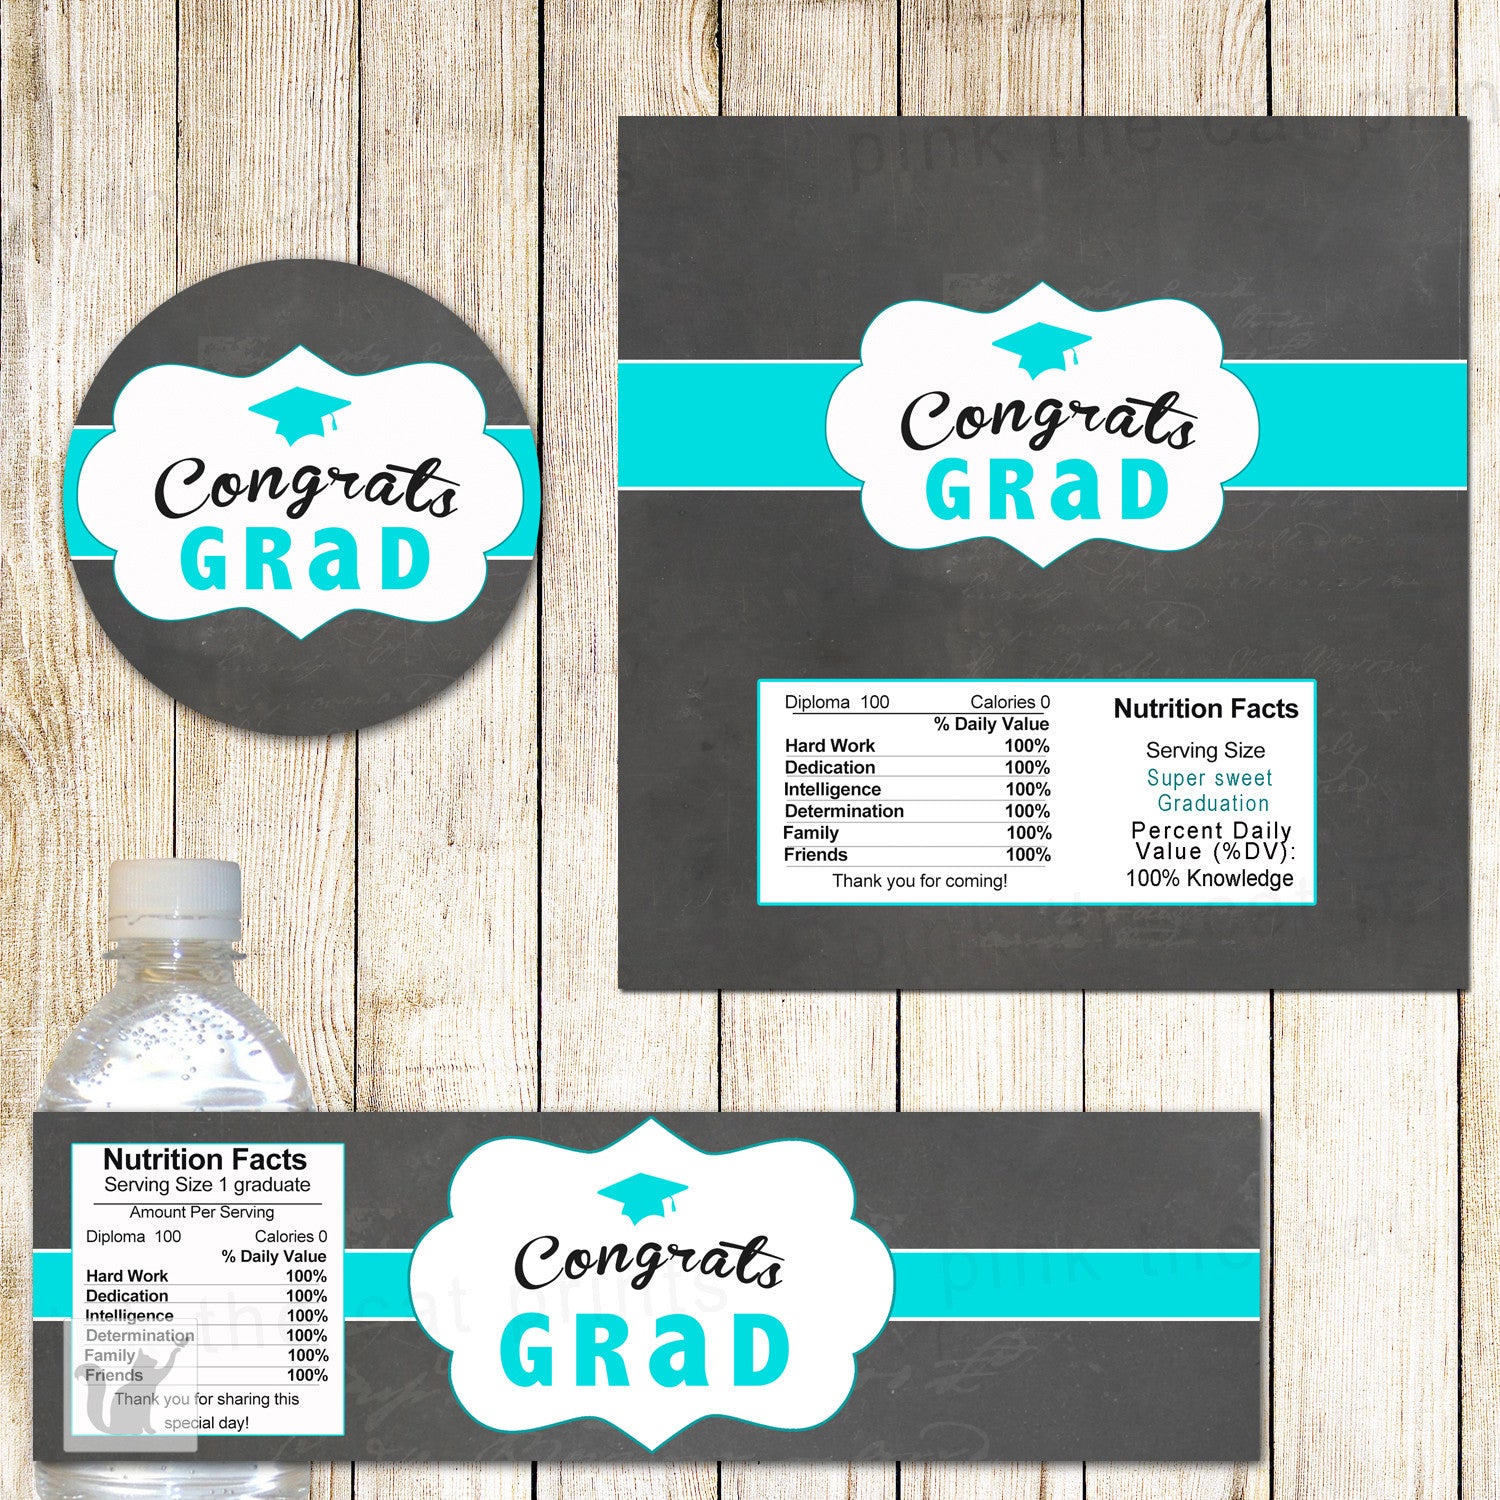 FREE PRINTABLE FILES FOR A GRADUATION PARTY